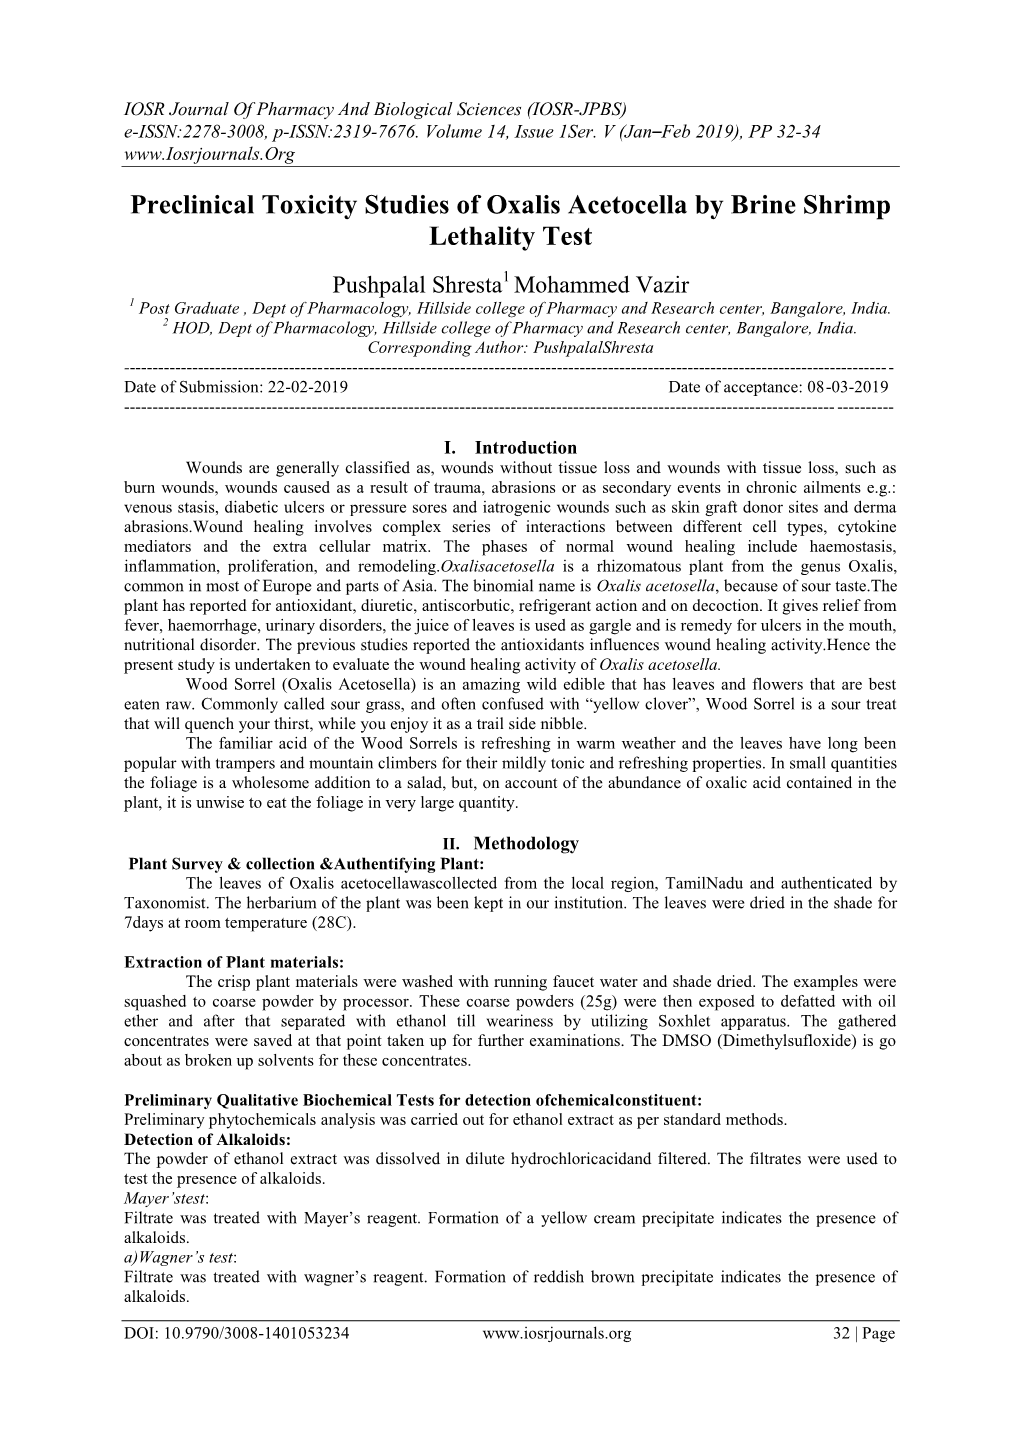 Preclinical Toxicity Studies of Oxalis Acetocella by Brine Shrimp Lethality Test